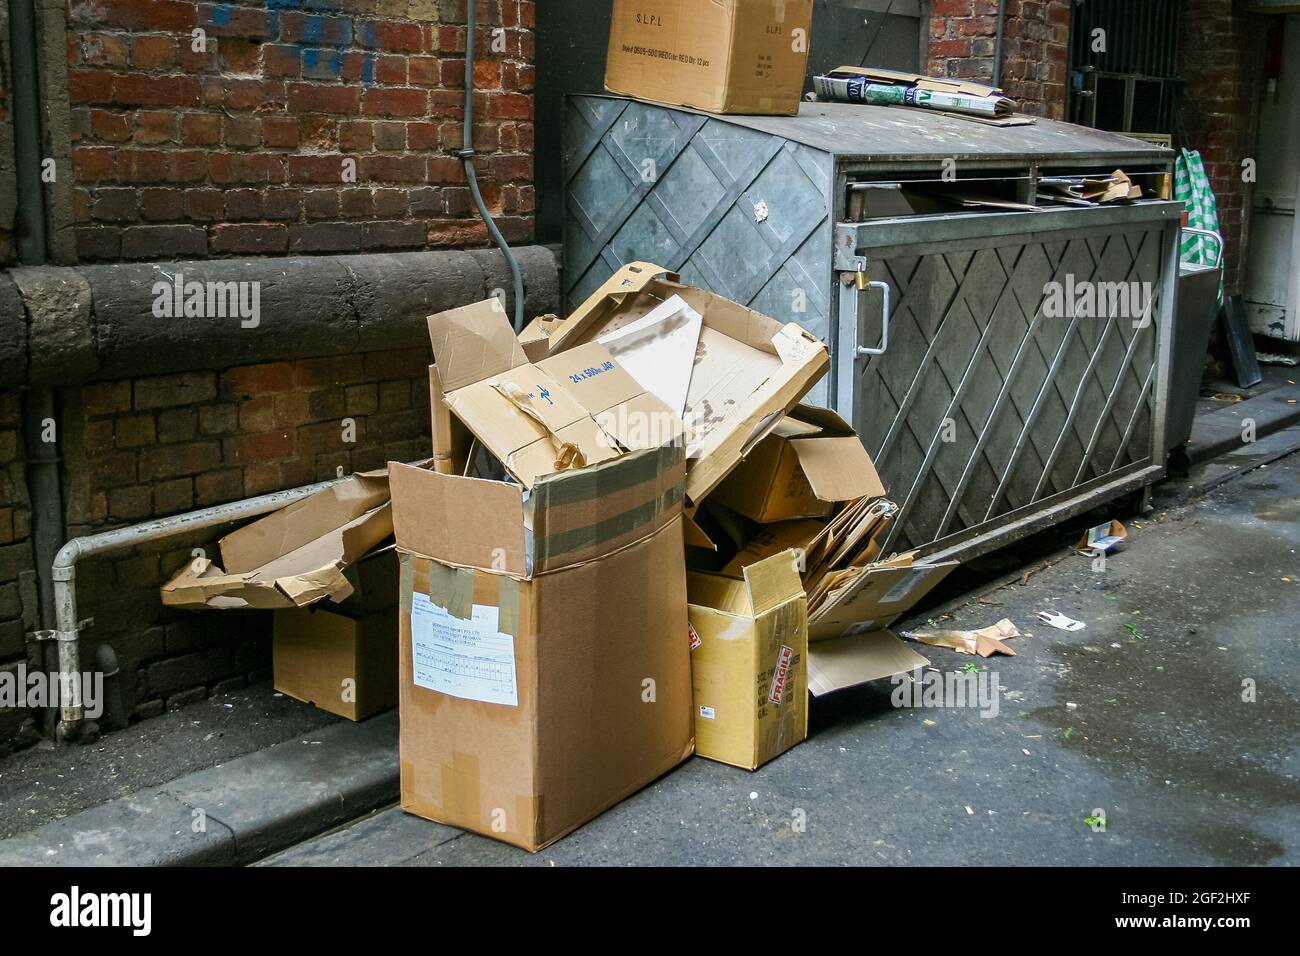 A city laneway filled with boxes and garbage Stock Photo